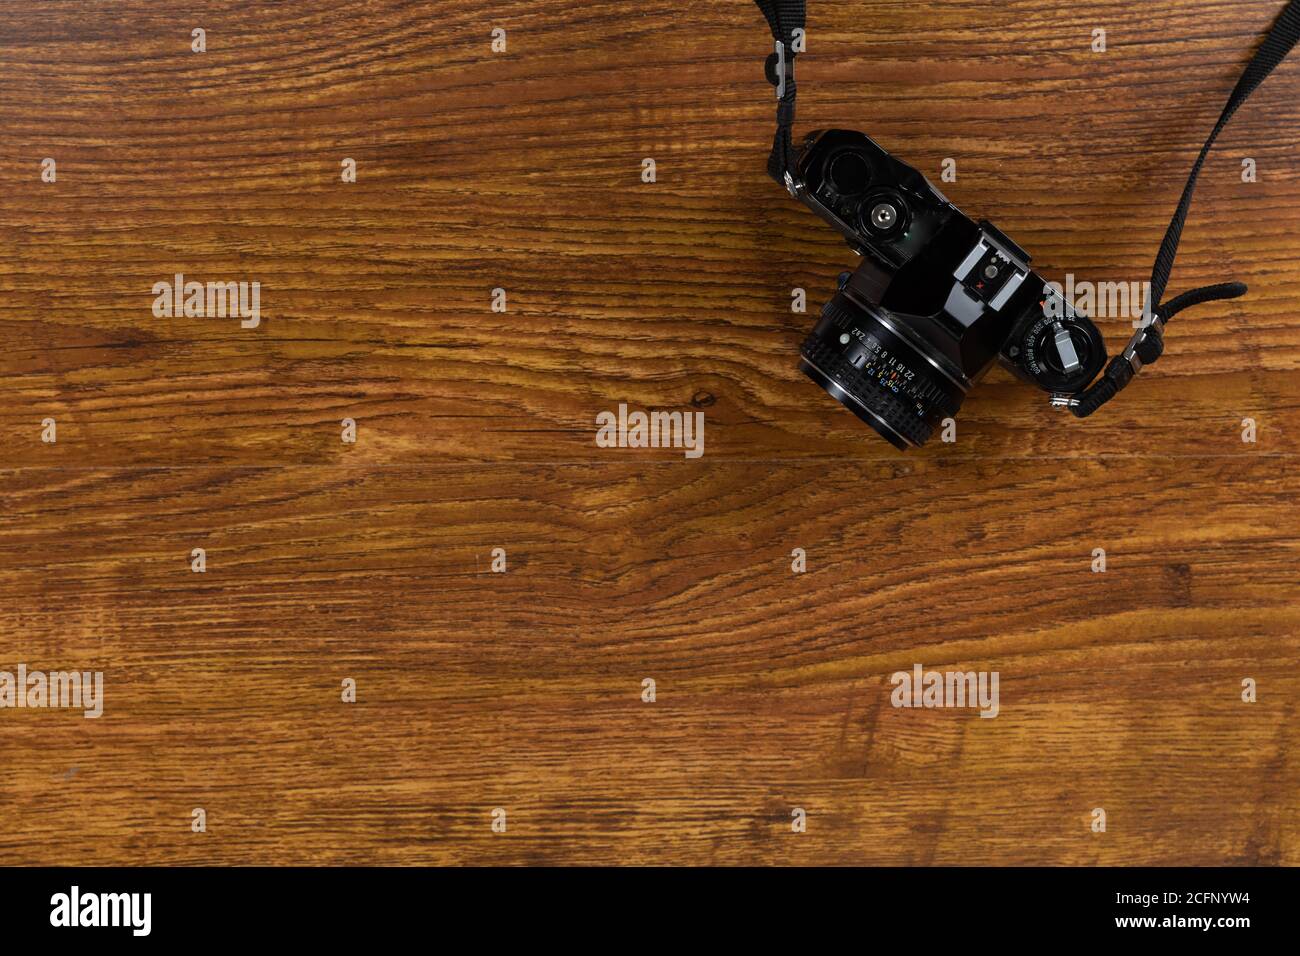 View of a camera on wood table background Stock Photo